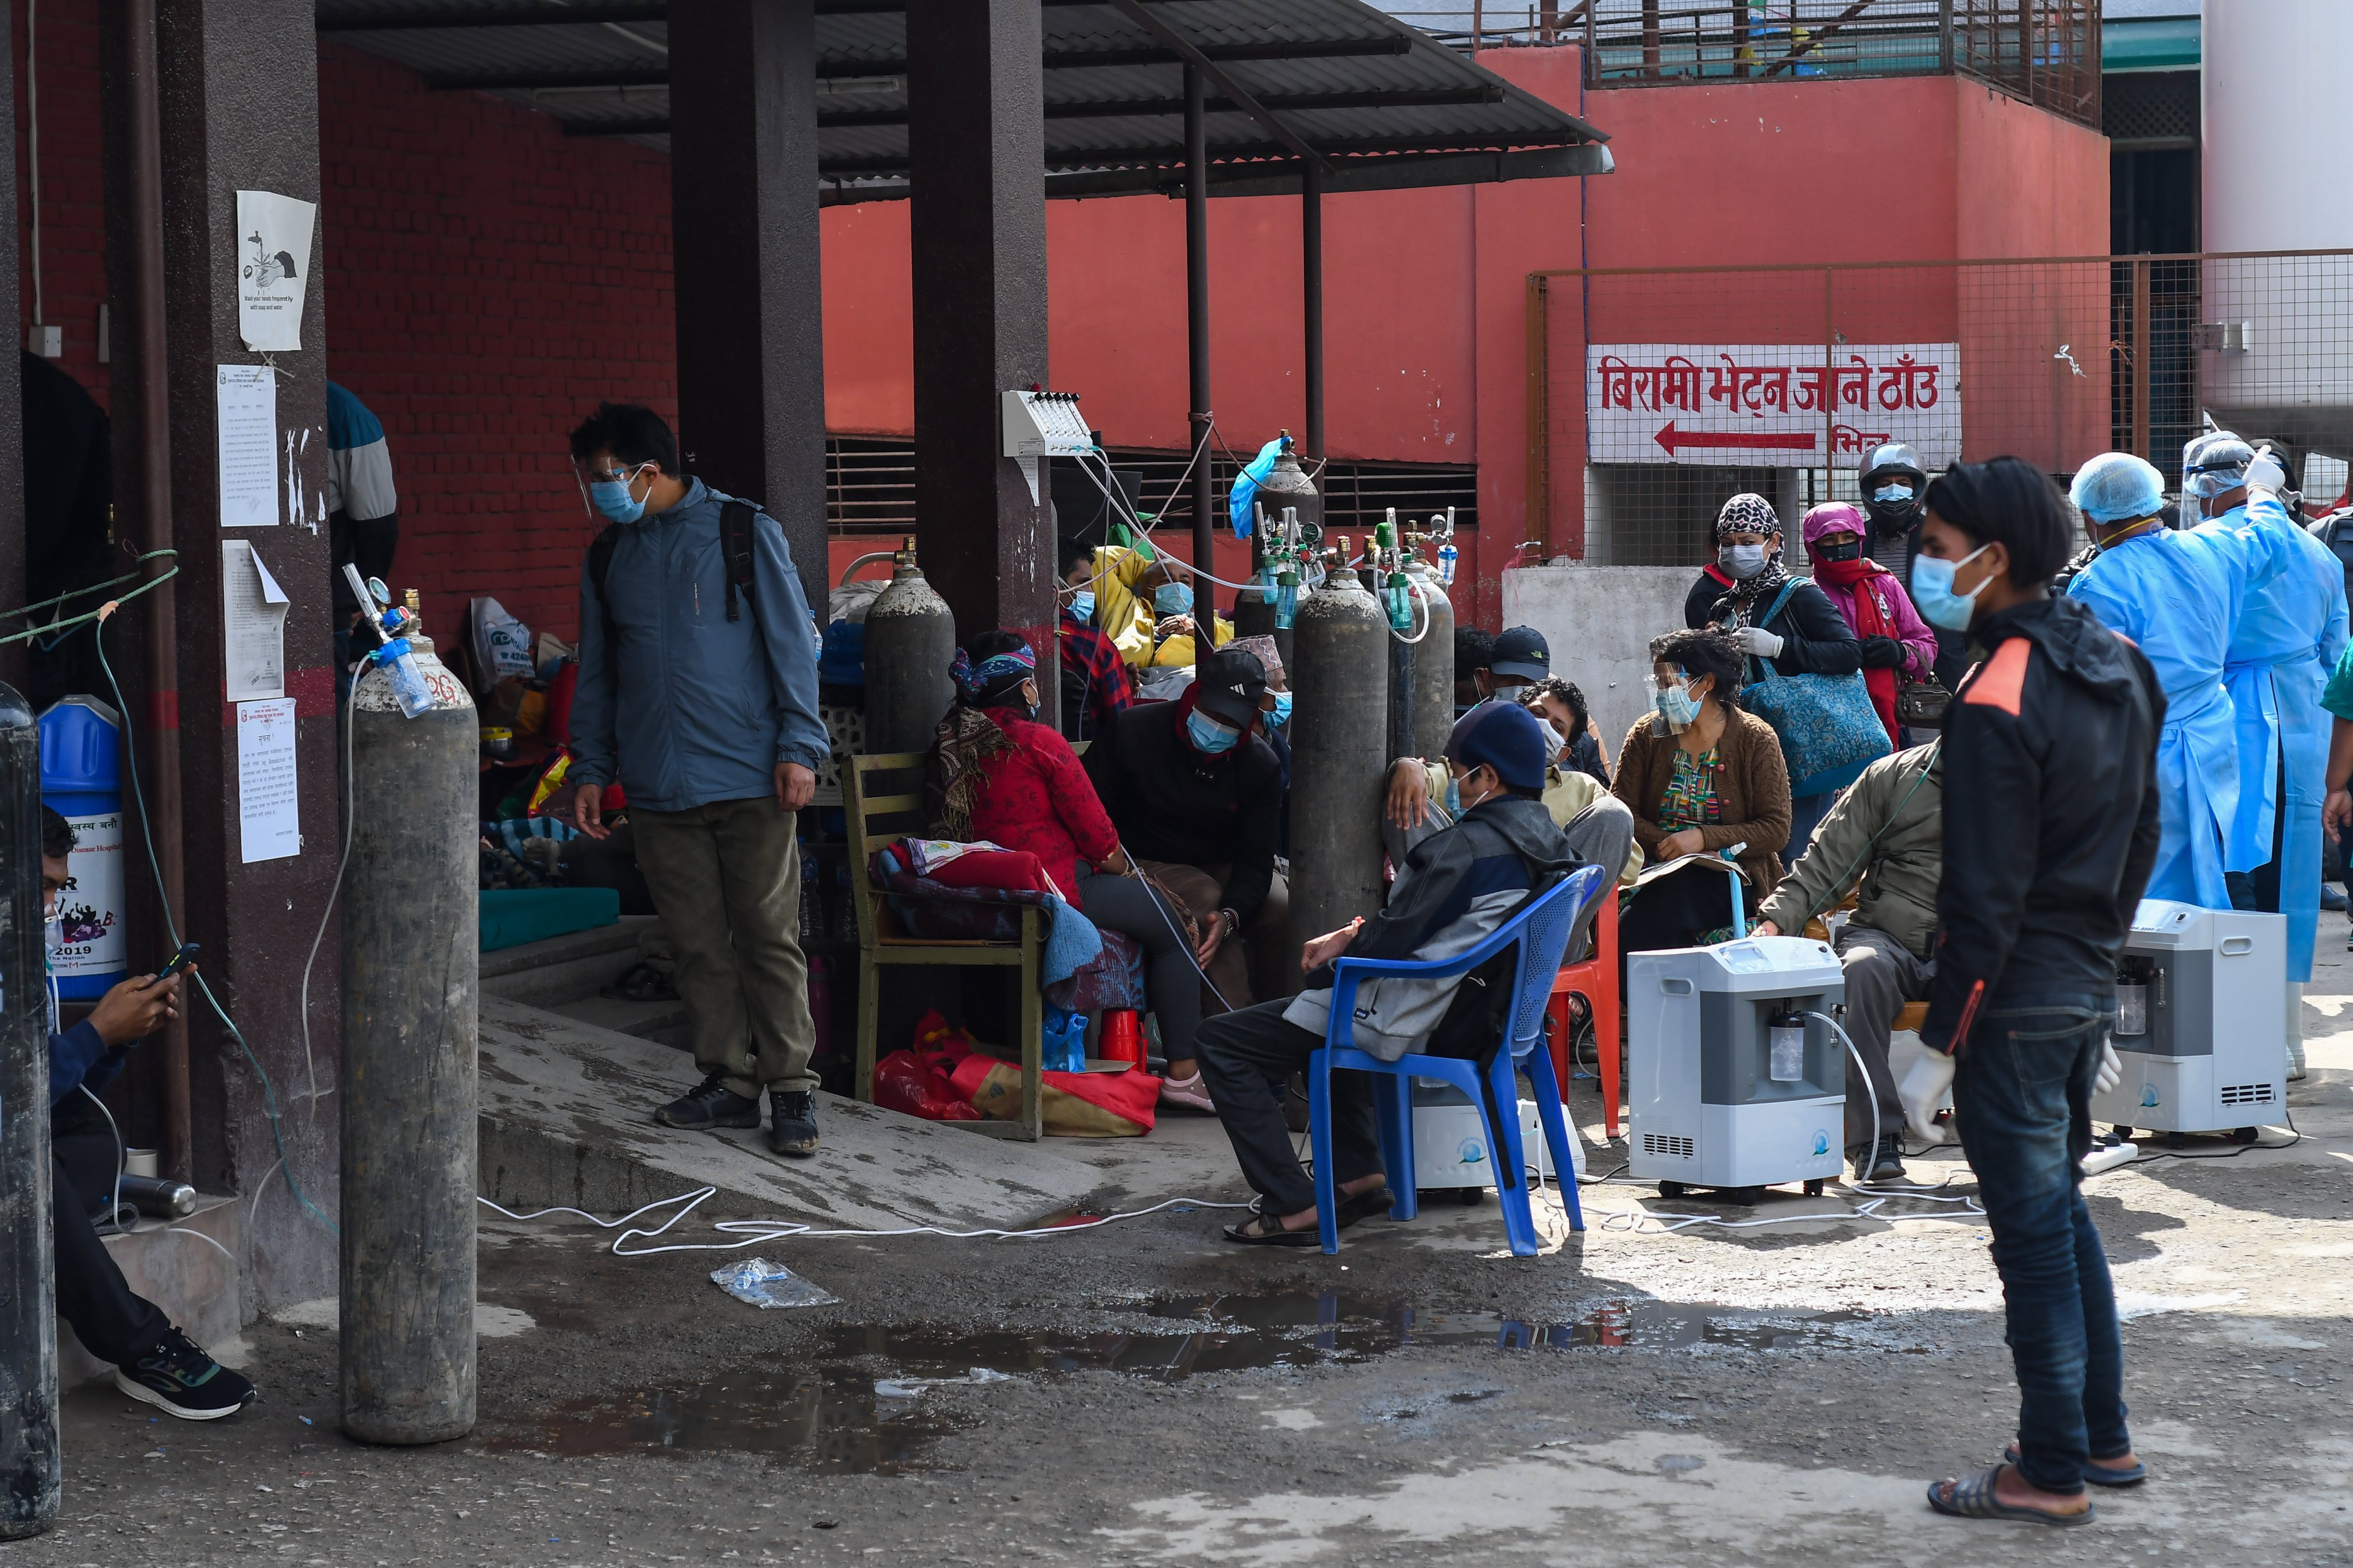 Covid-19 patients get treatment outside of hospital in Nepal